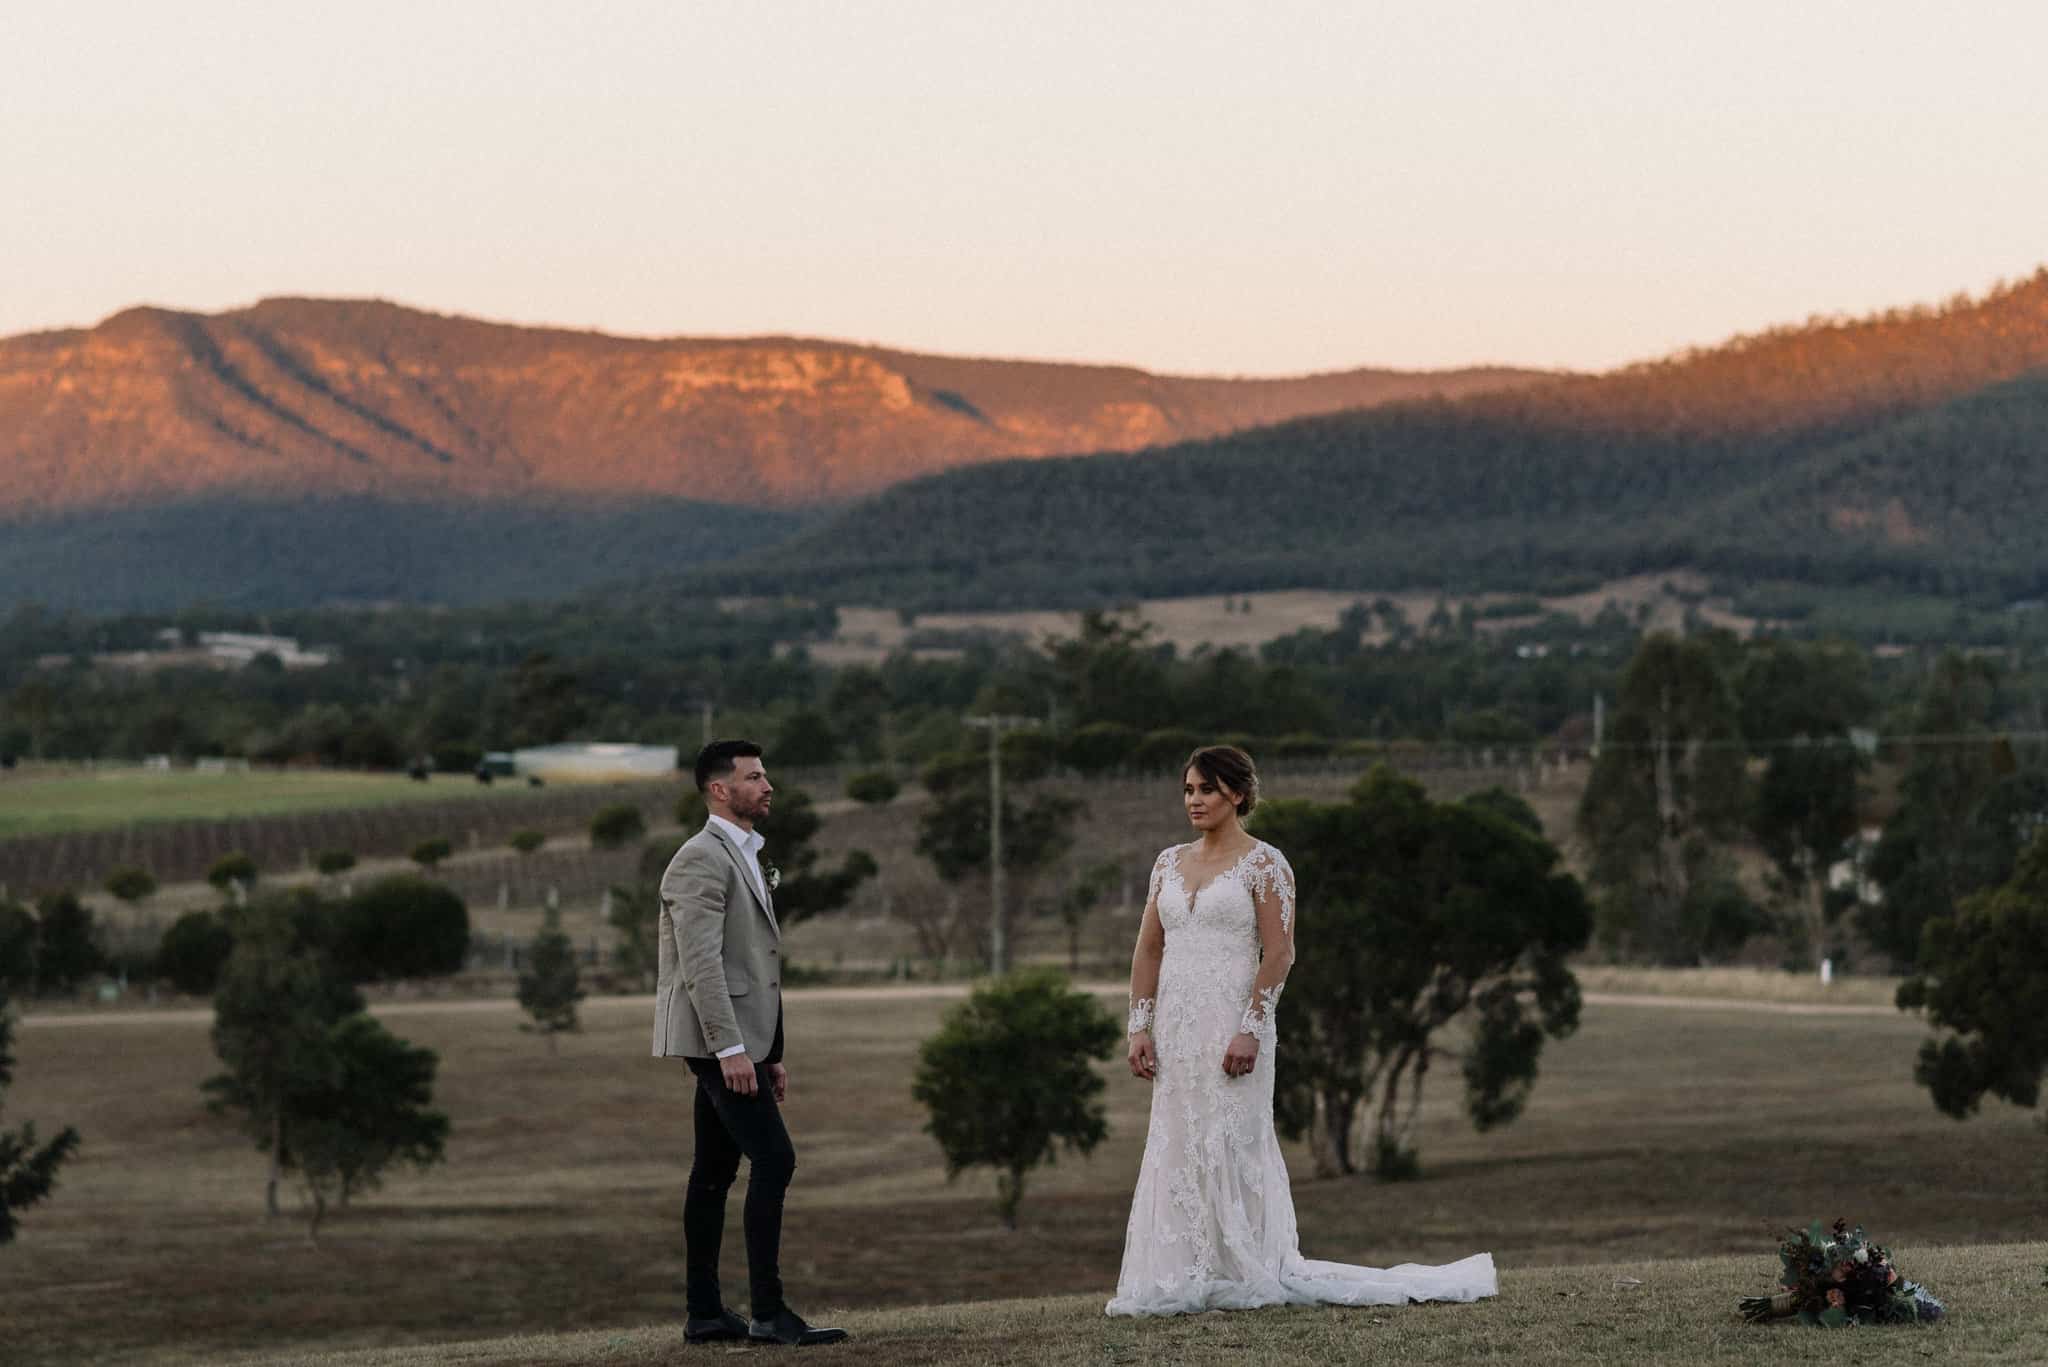 The perfect wedding day timeline allows bride and groom to have stunning sunset photos in front of mountains